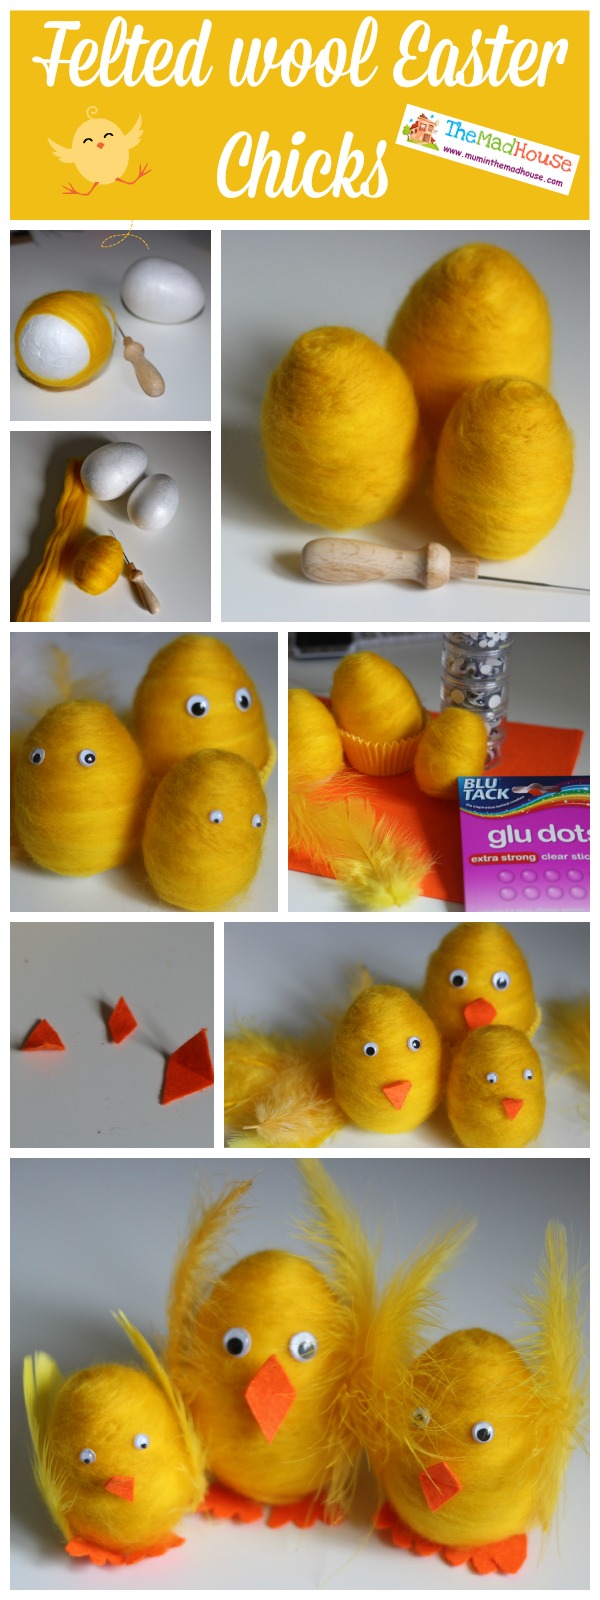 felted wool easter chicks how to